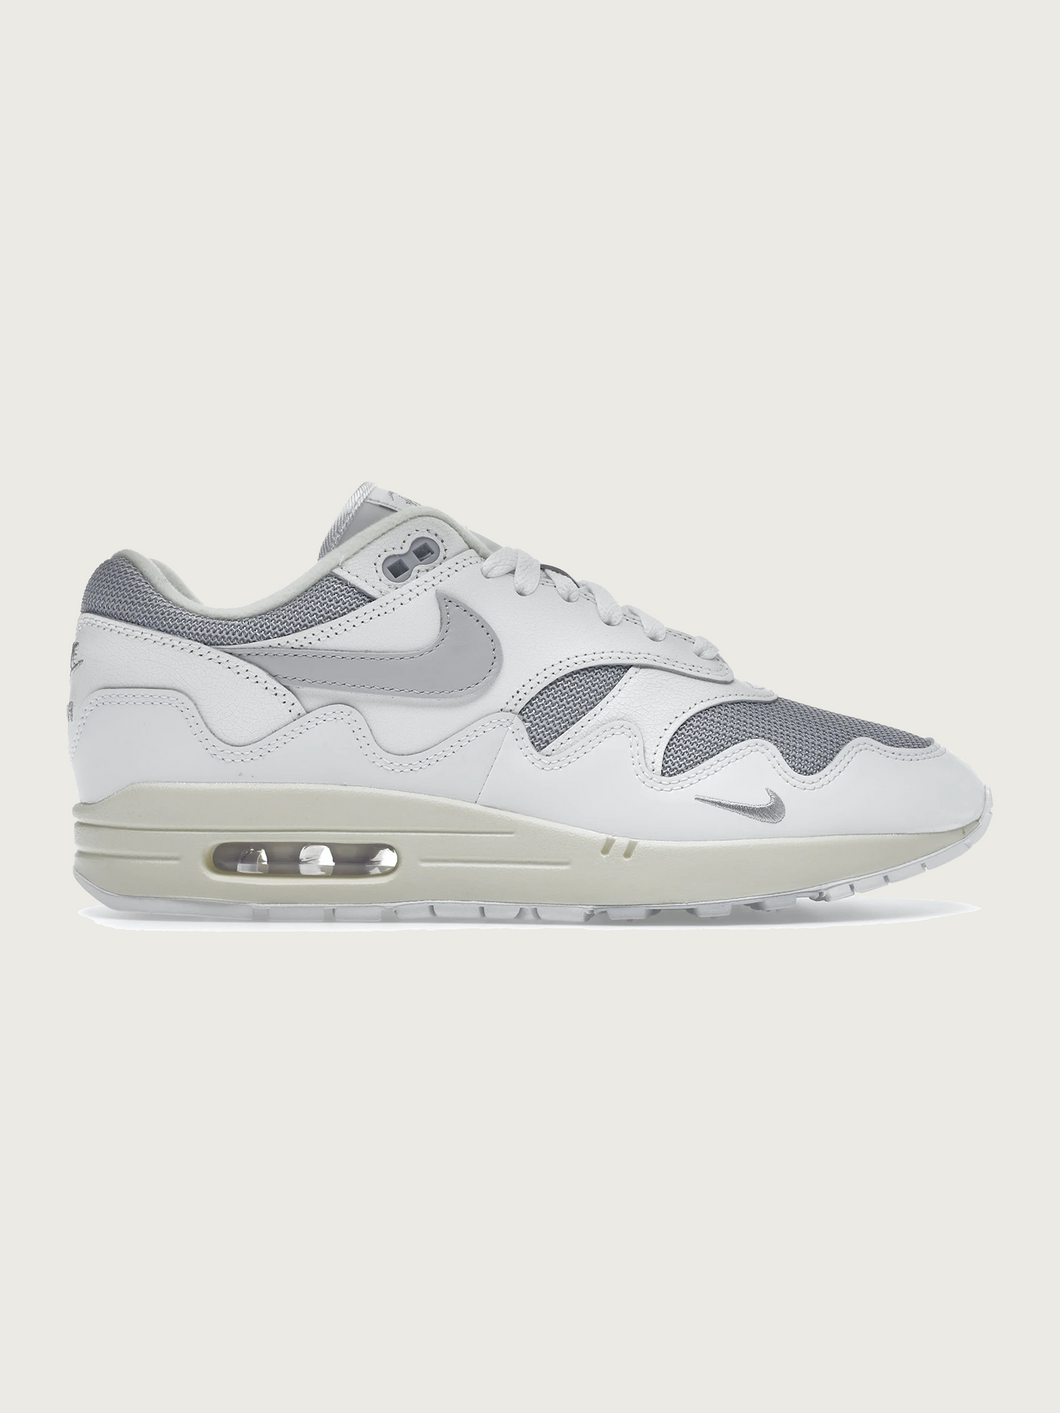 Nike Air Max 1 Patta Waves White Silver (Without Bracelet)